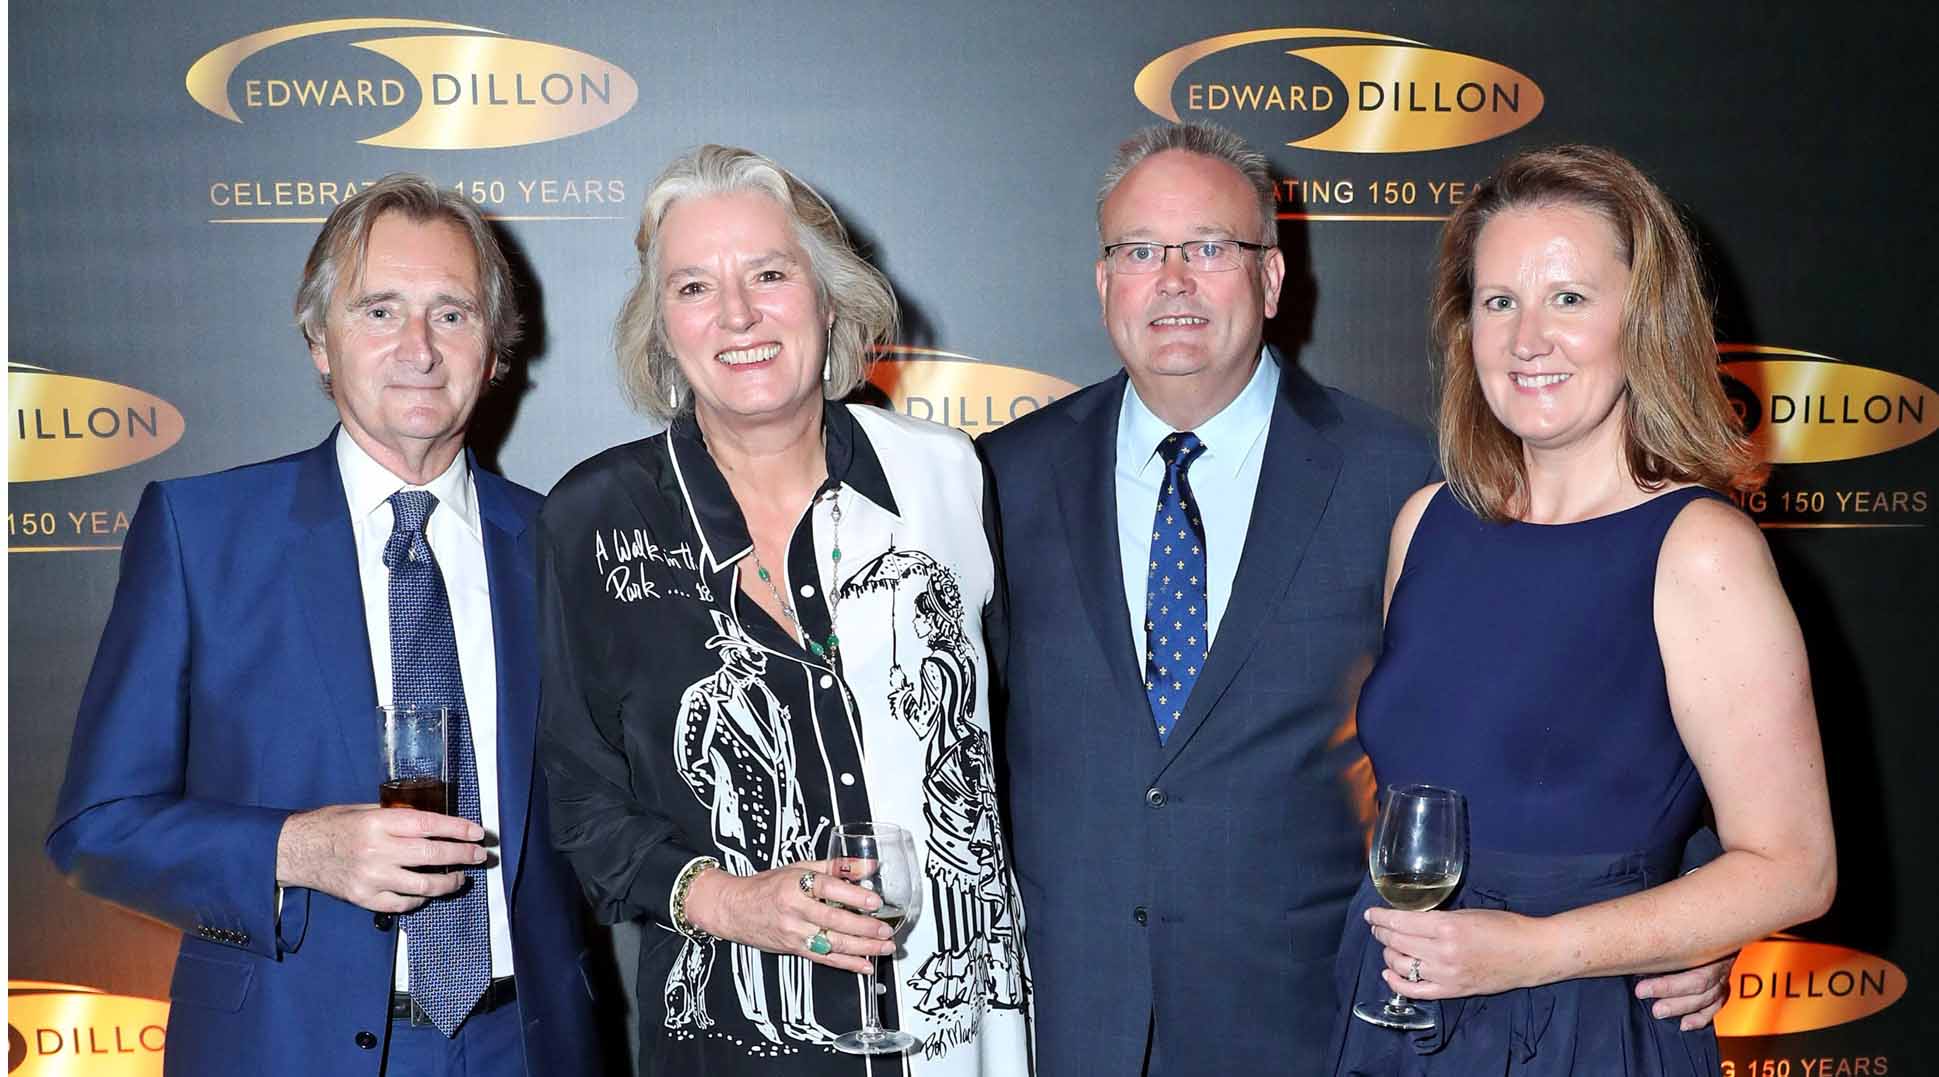 From left: Lord Henry and Lady Iona Mountcharles with Andy and Avril O’Hara at the Gala Dinner celebrating 150 years of Edward Dillon & Company in the RHK recently.